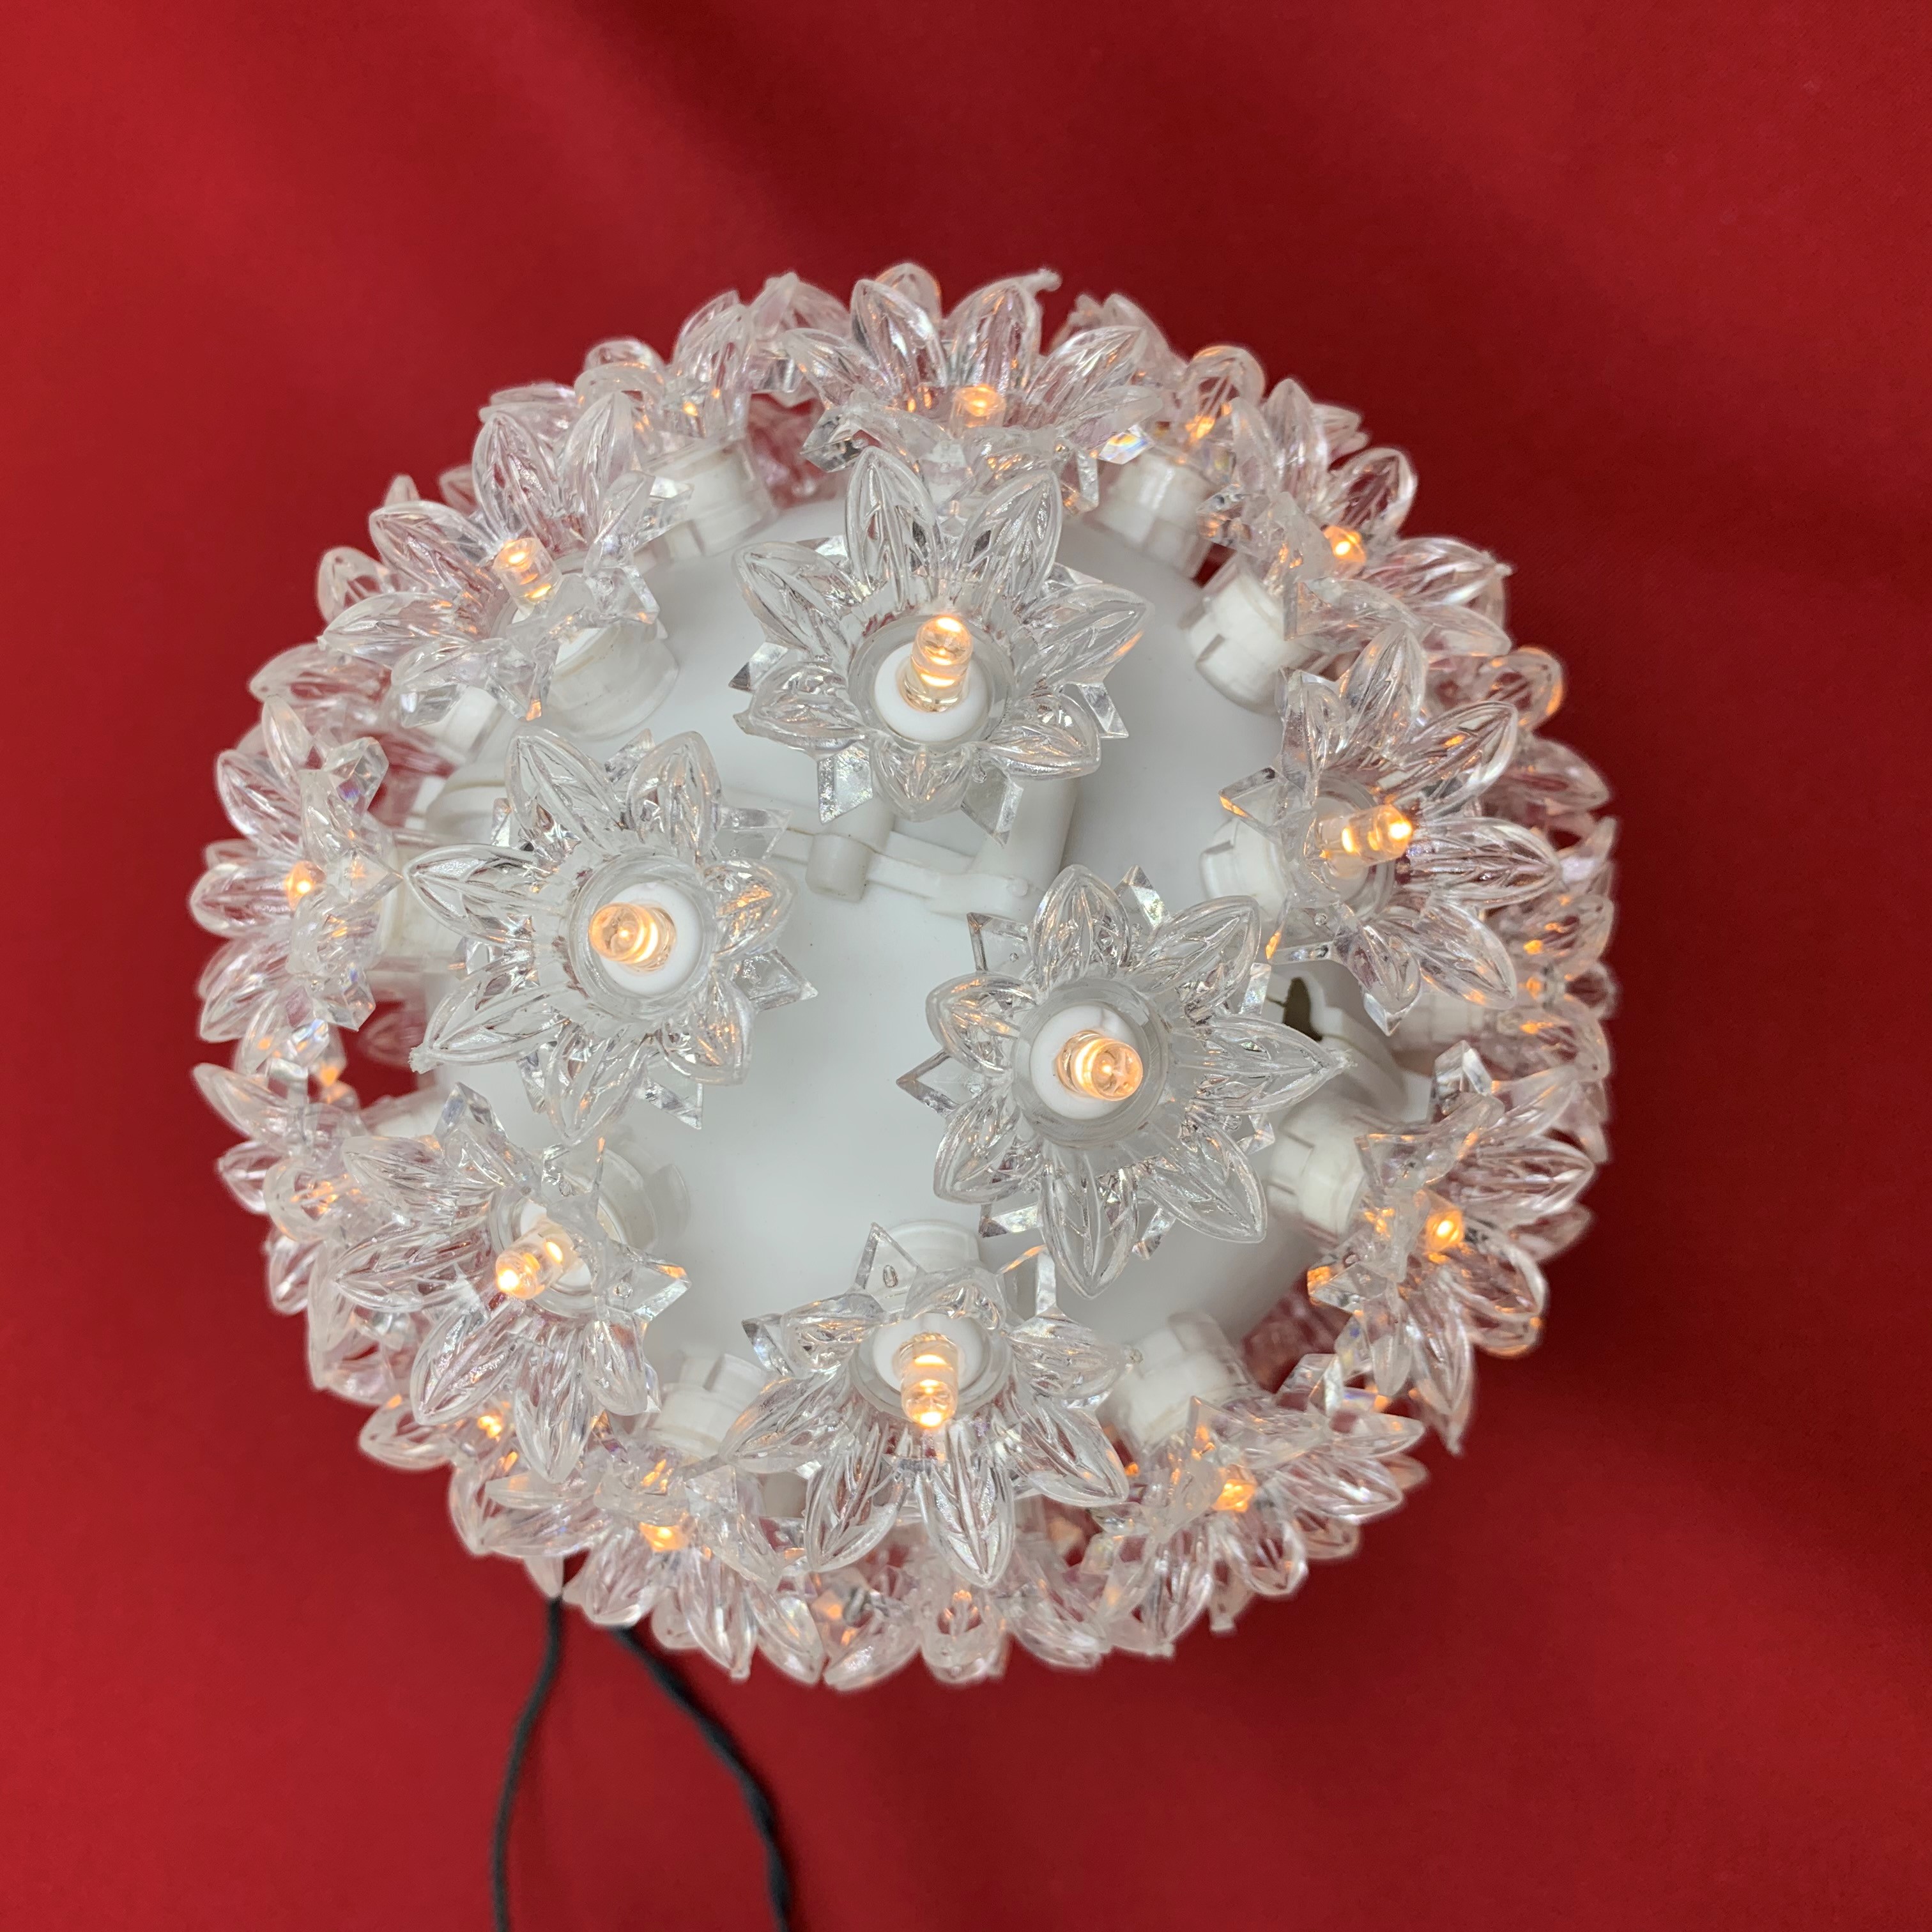 6in BALL LED WARM WHITE ORMAN